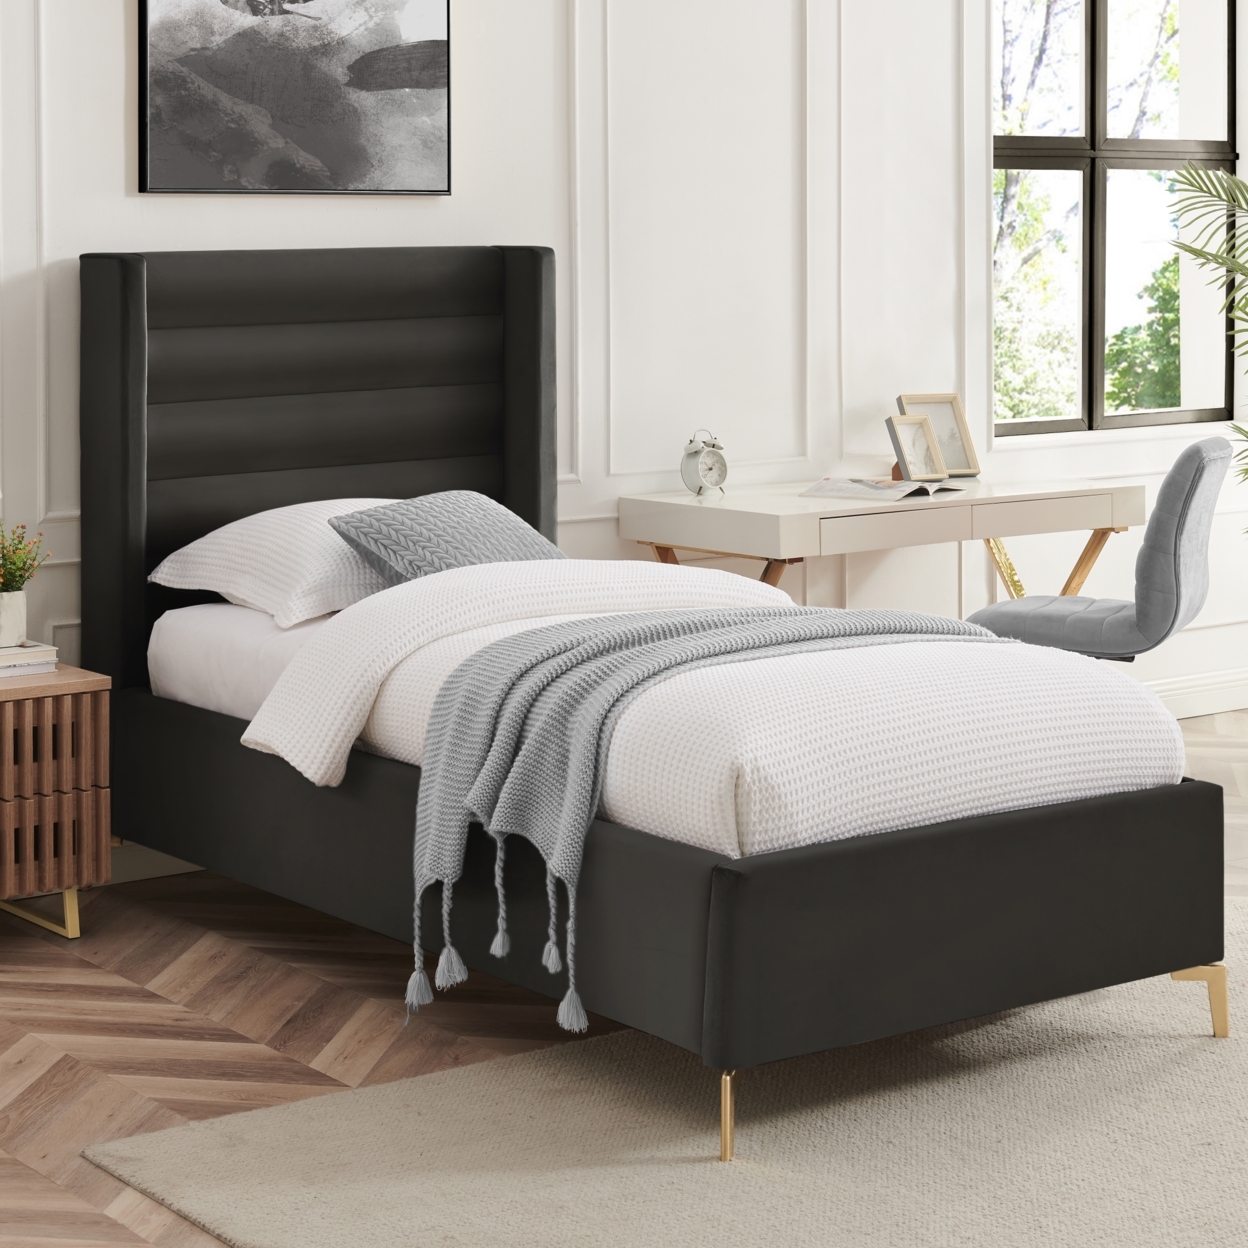 Rayce Bed -Velvet Upholstered, Wingback Channel Tufted Headboard, Oblique Legs, Slats Included - Black, Twin Xl